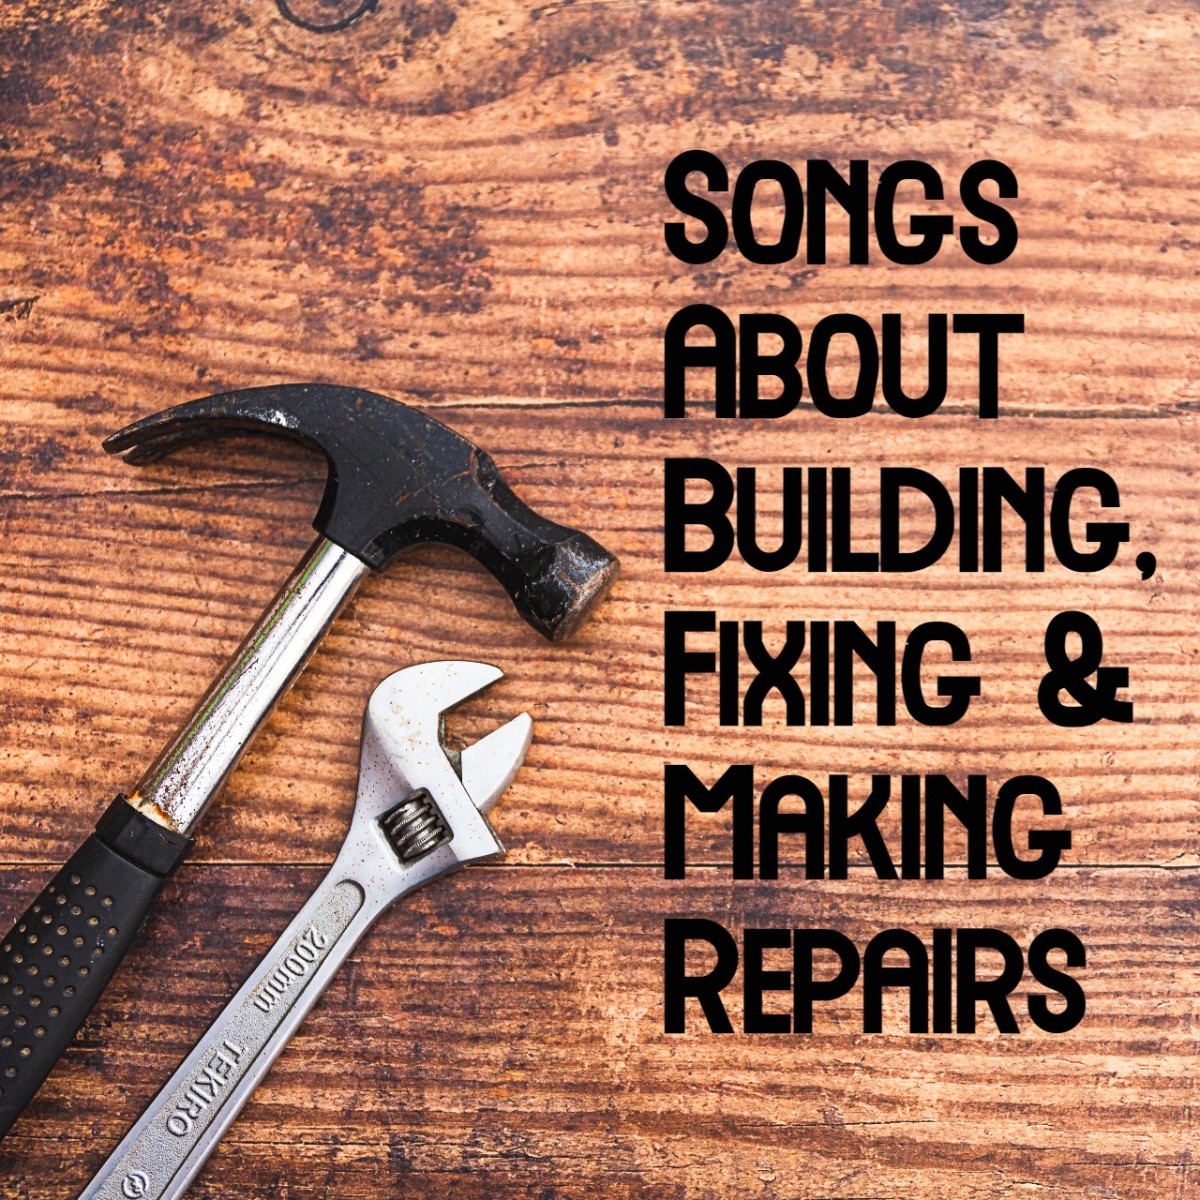 46 Songs About Building, Fixing and Making Repairs